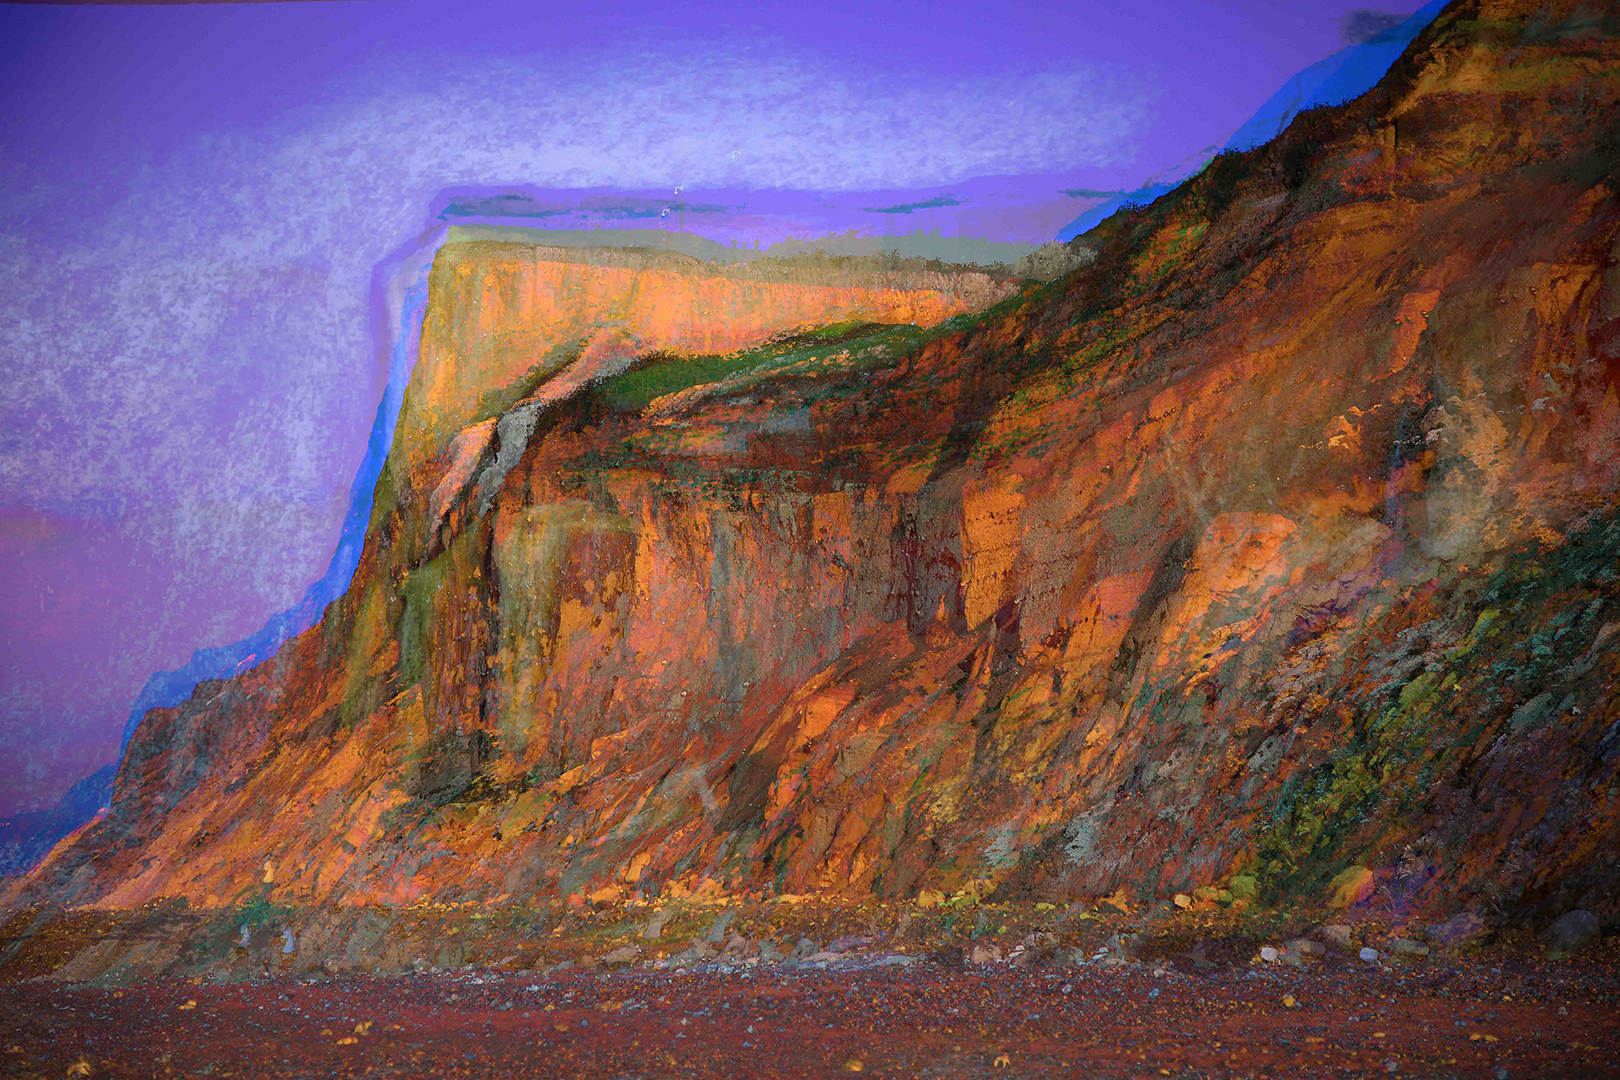 Mud Cliff, 2023. Digital compilation of pastel sketch and multiple exposure images, giclee print, 84x119am.